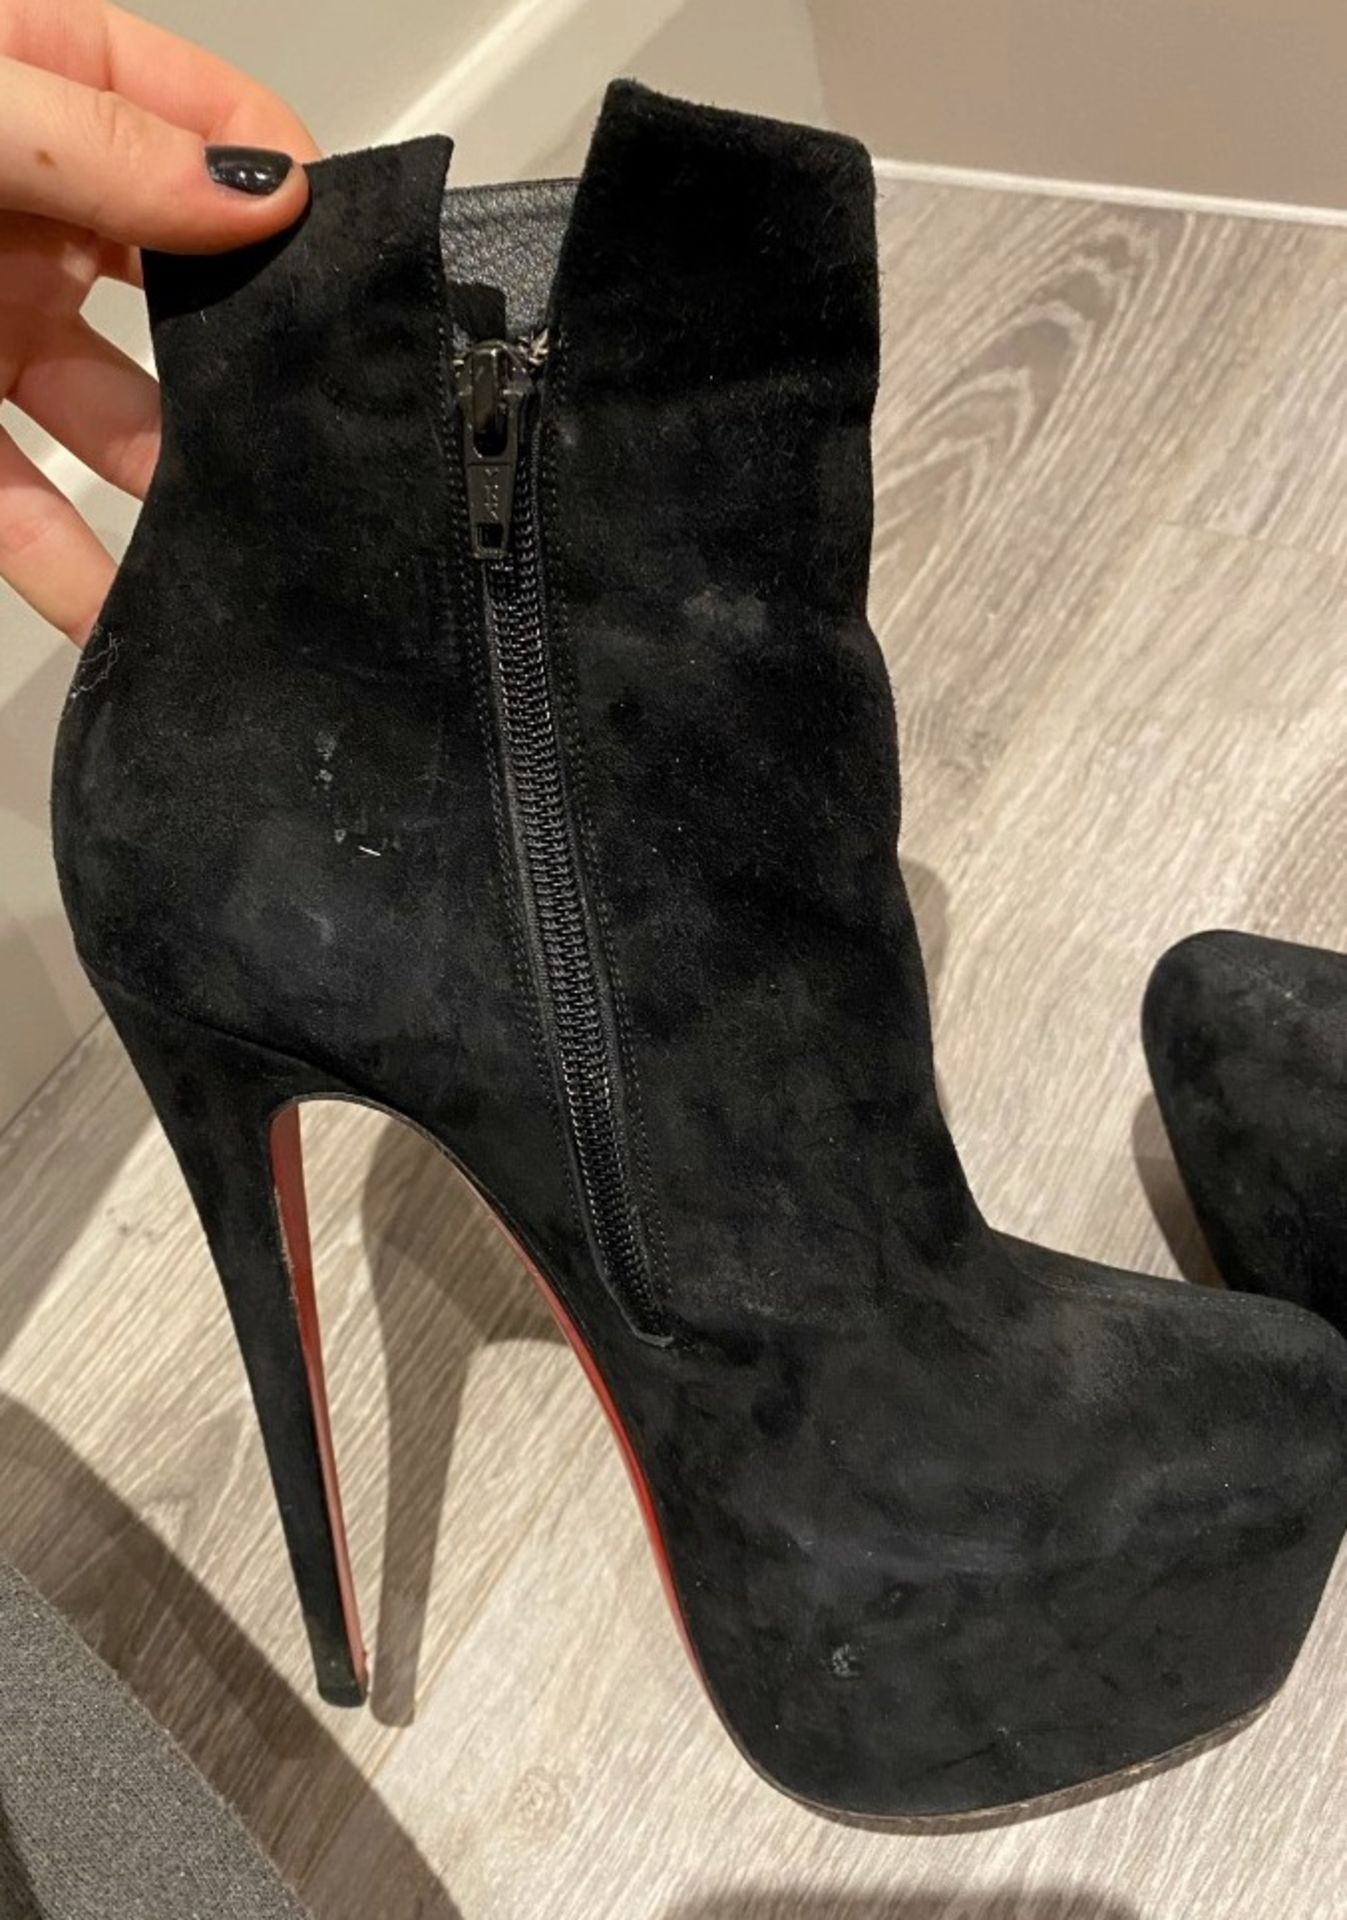 1 x Pair Of Genuine Christain Louboutin Boots In Black - Size: 36.5 - Preowned in Good Condition - R - Image 2 of 4